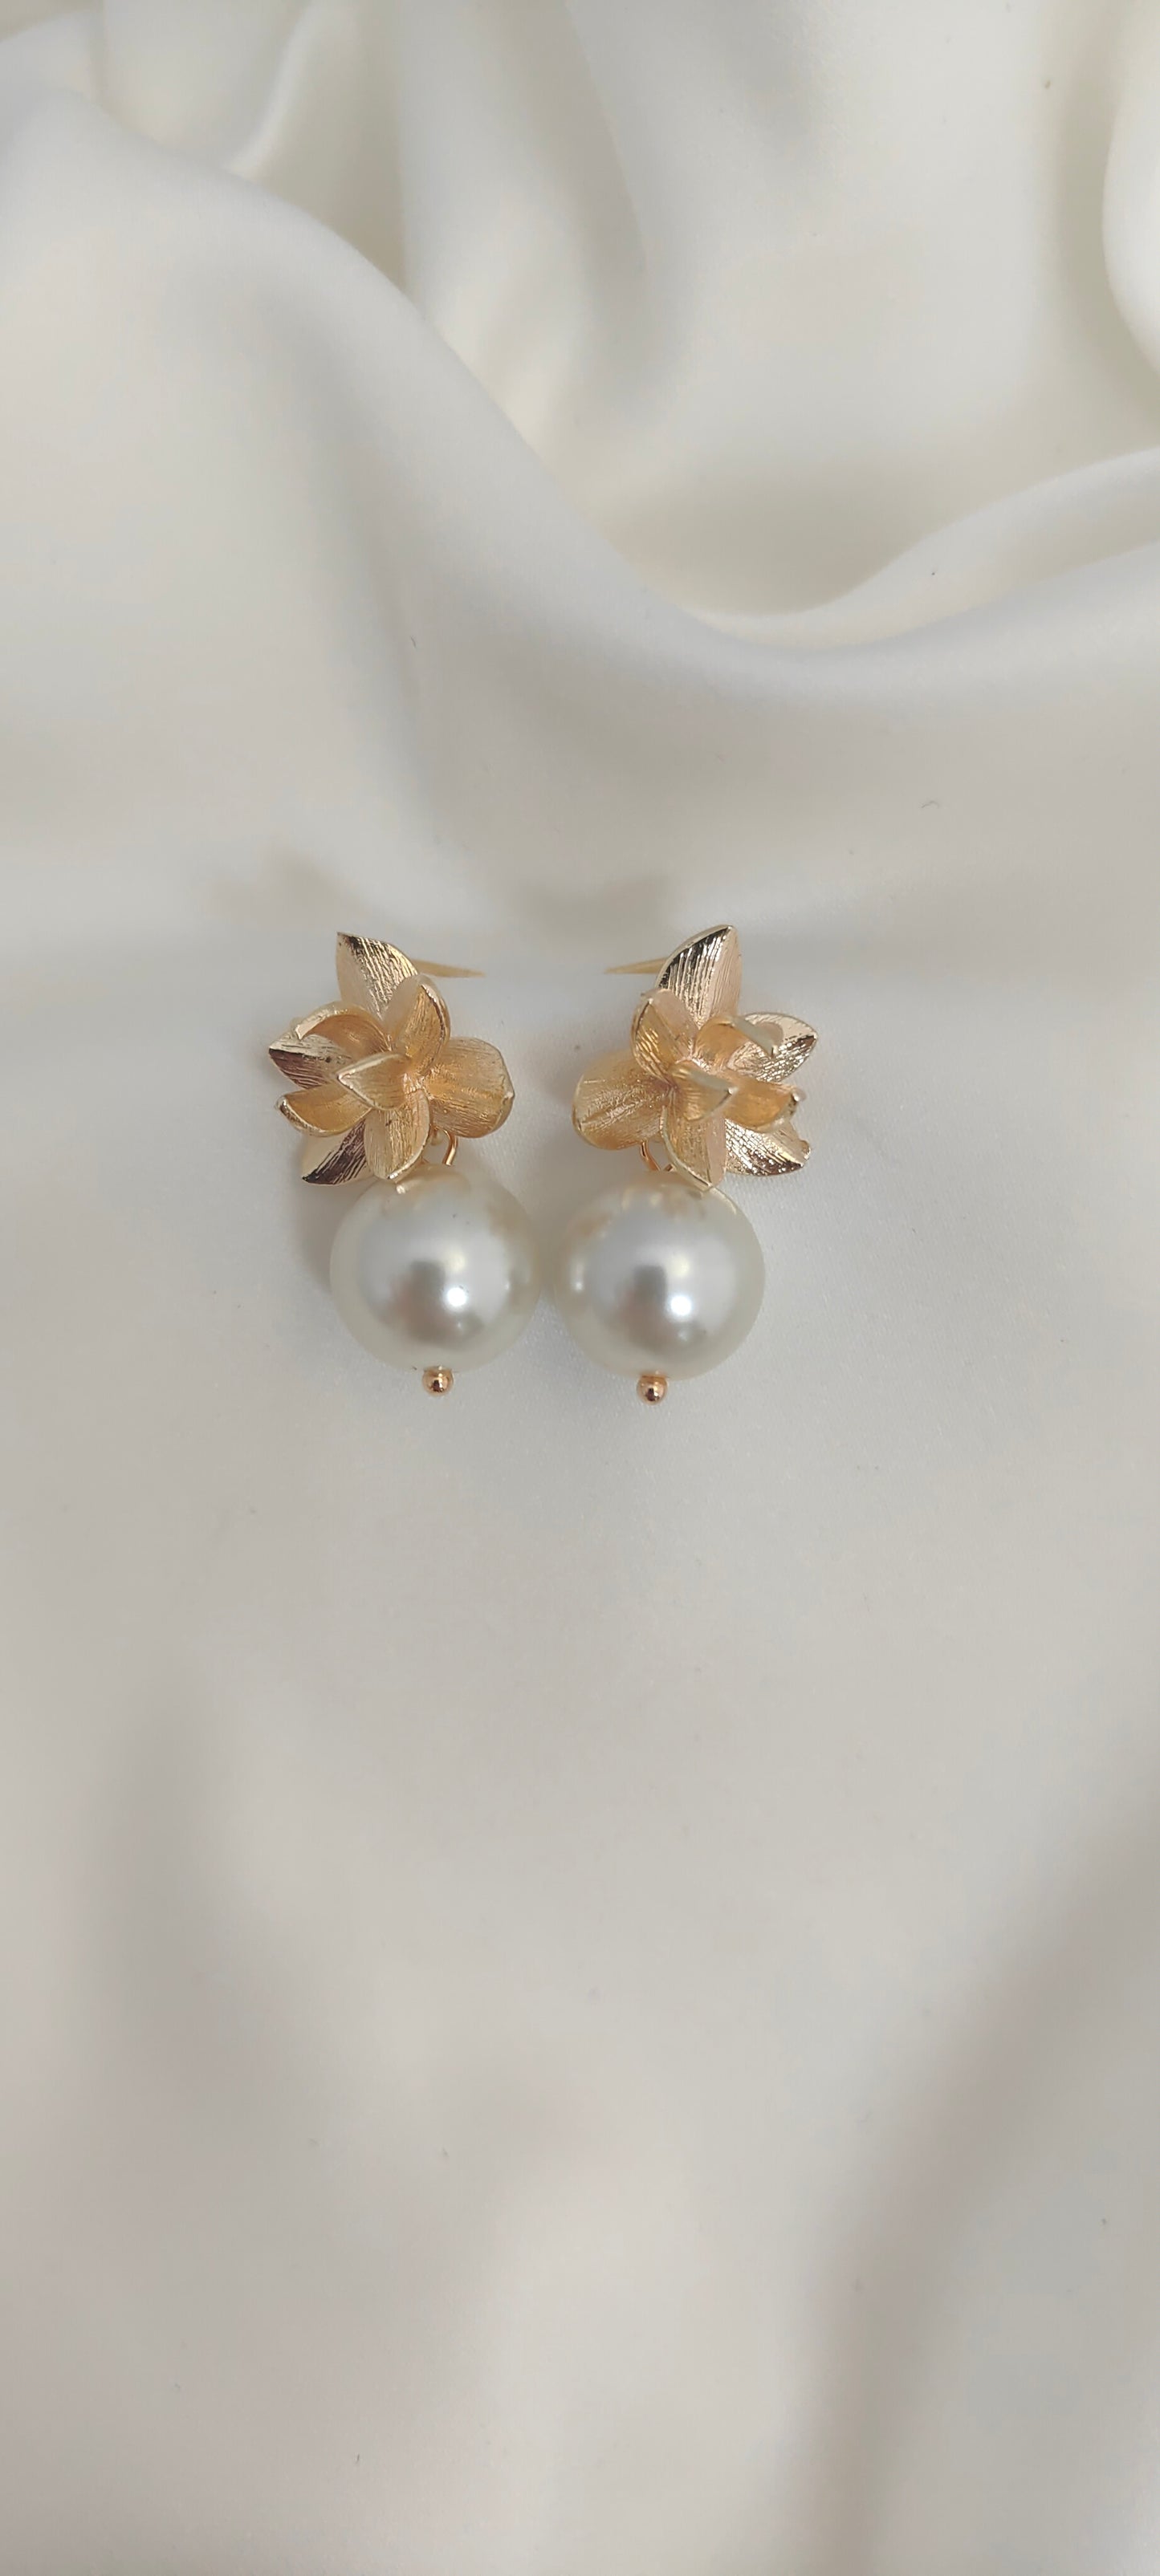 OPHELIA - Statement Pearl & Gold Bridal Earrings